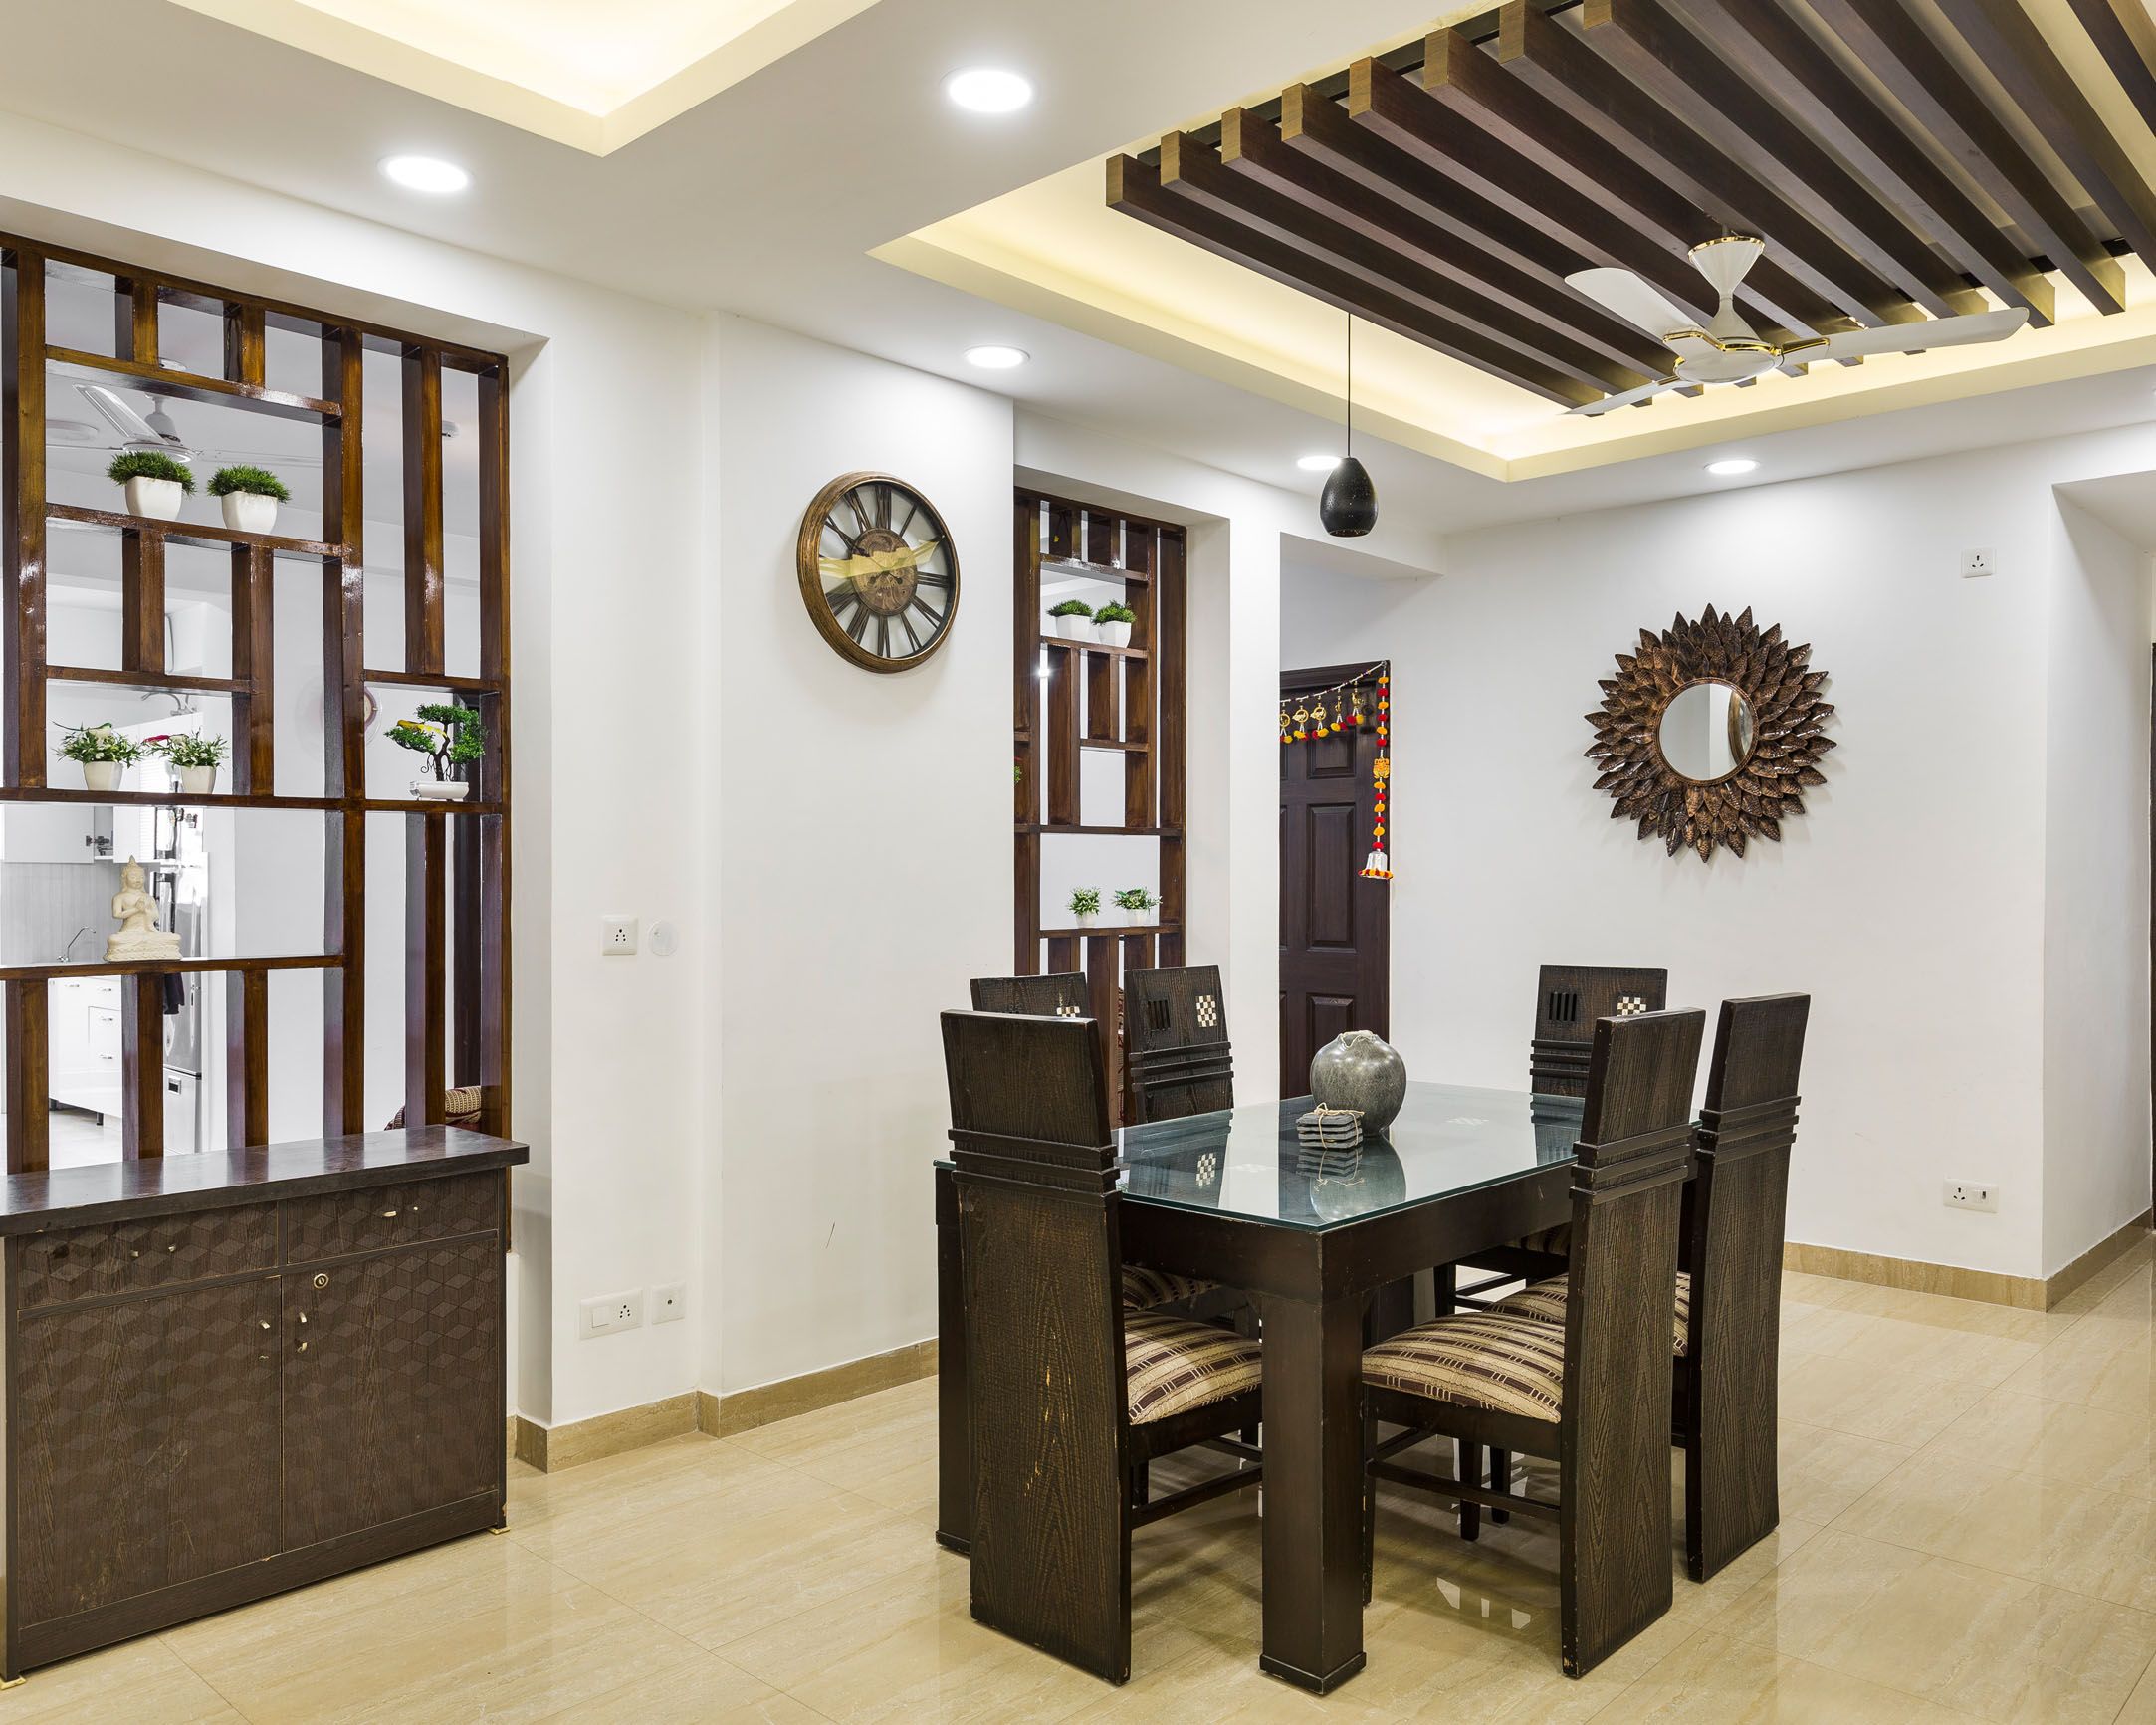 Modern Wooden 6-Seater Dining Room Design With Wooden False Ceiling